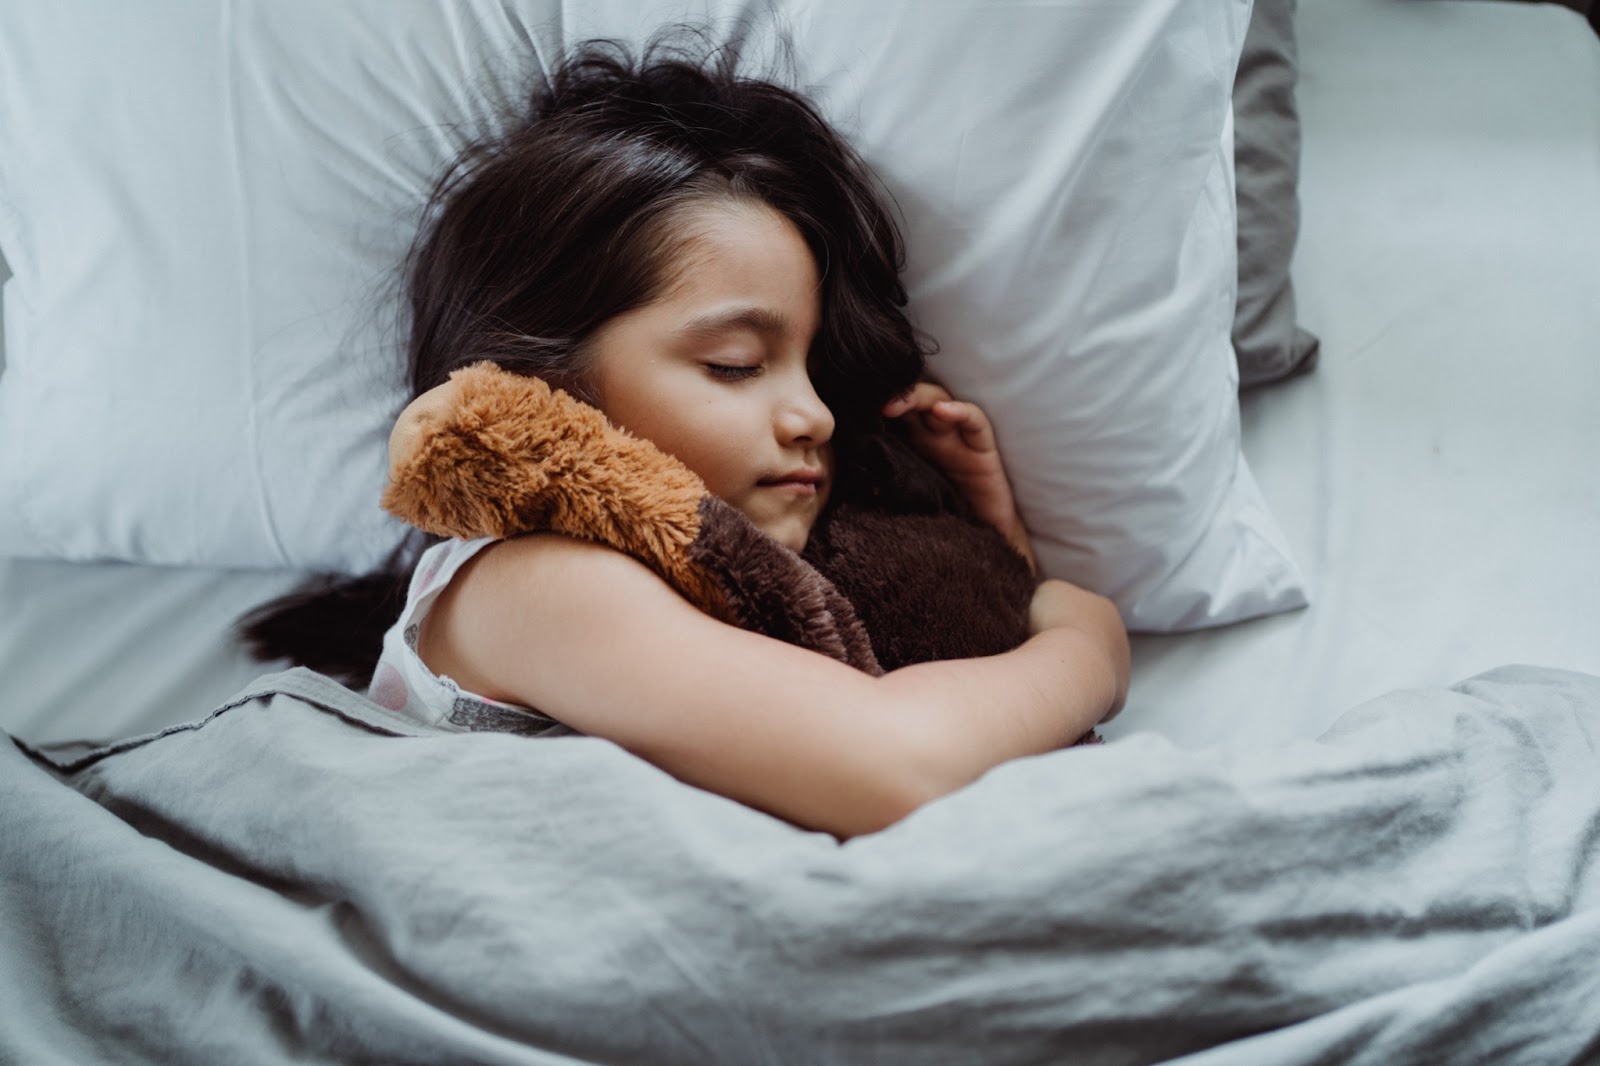 A young girl holds a teddy bear while sleeping in bed